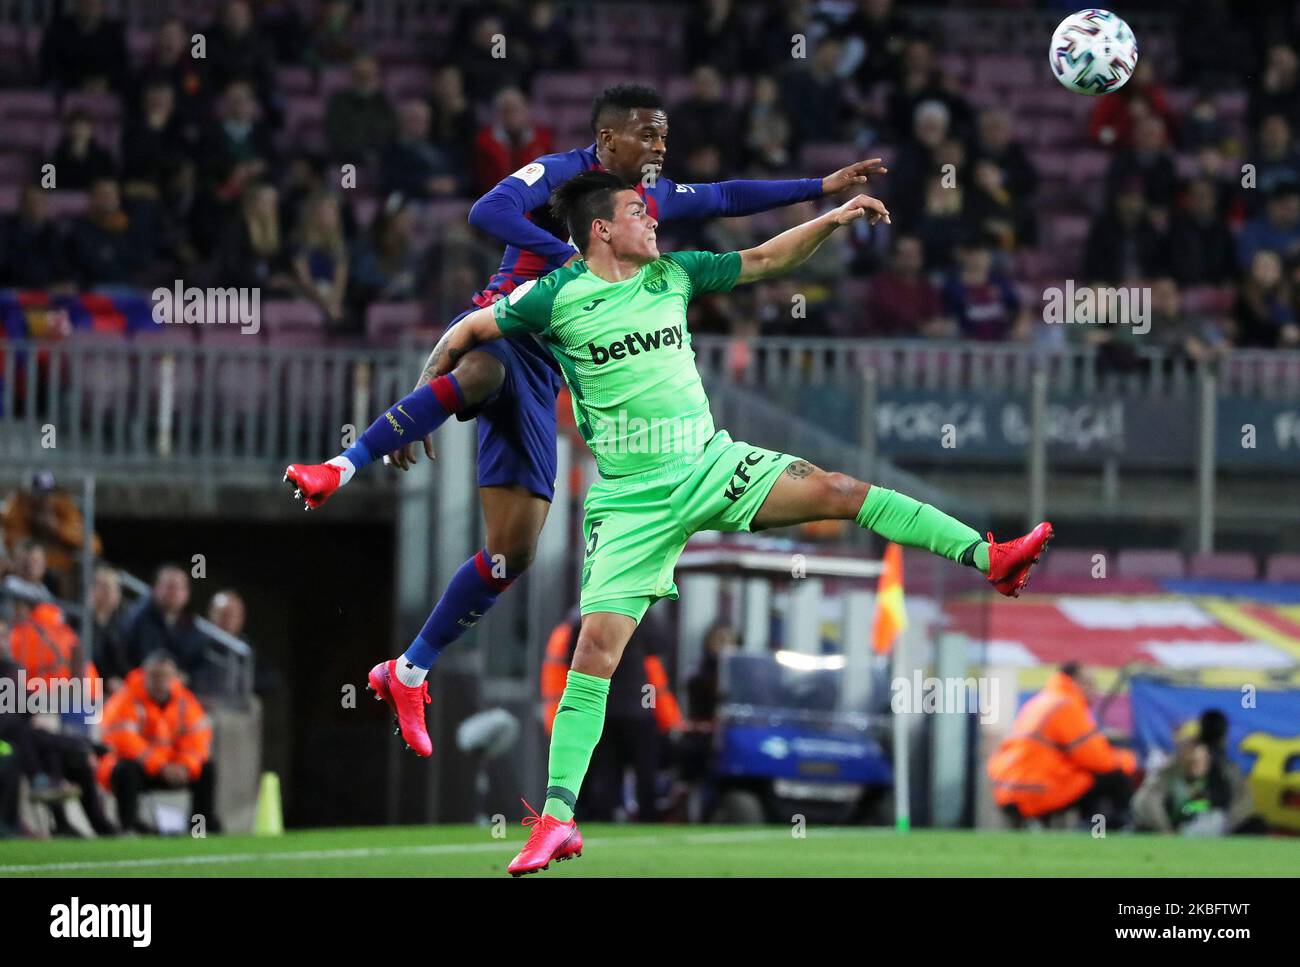 Jonathan Silva and Nelson Semedo during the match between FC Barcelona and CD Leganes, corresponding to the 1/8 final of the Copa del Rey, played at the Camp Nou Stadium on 30th January 2020, in Barcelona, Spain. (Photo by Joan Valls/Urbanandsport/NurPhoto) Stock Photo